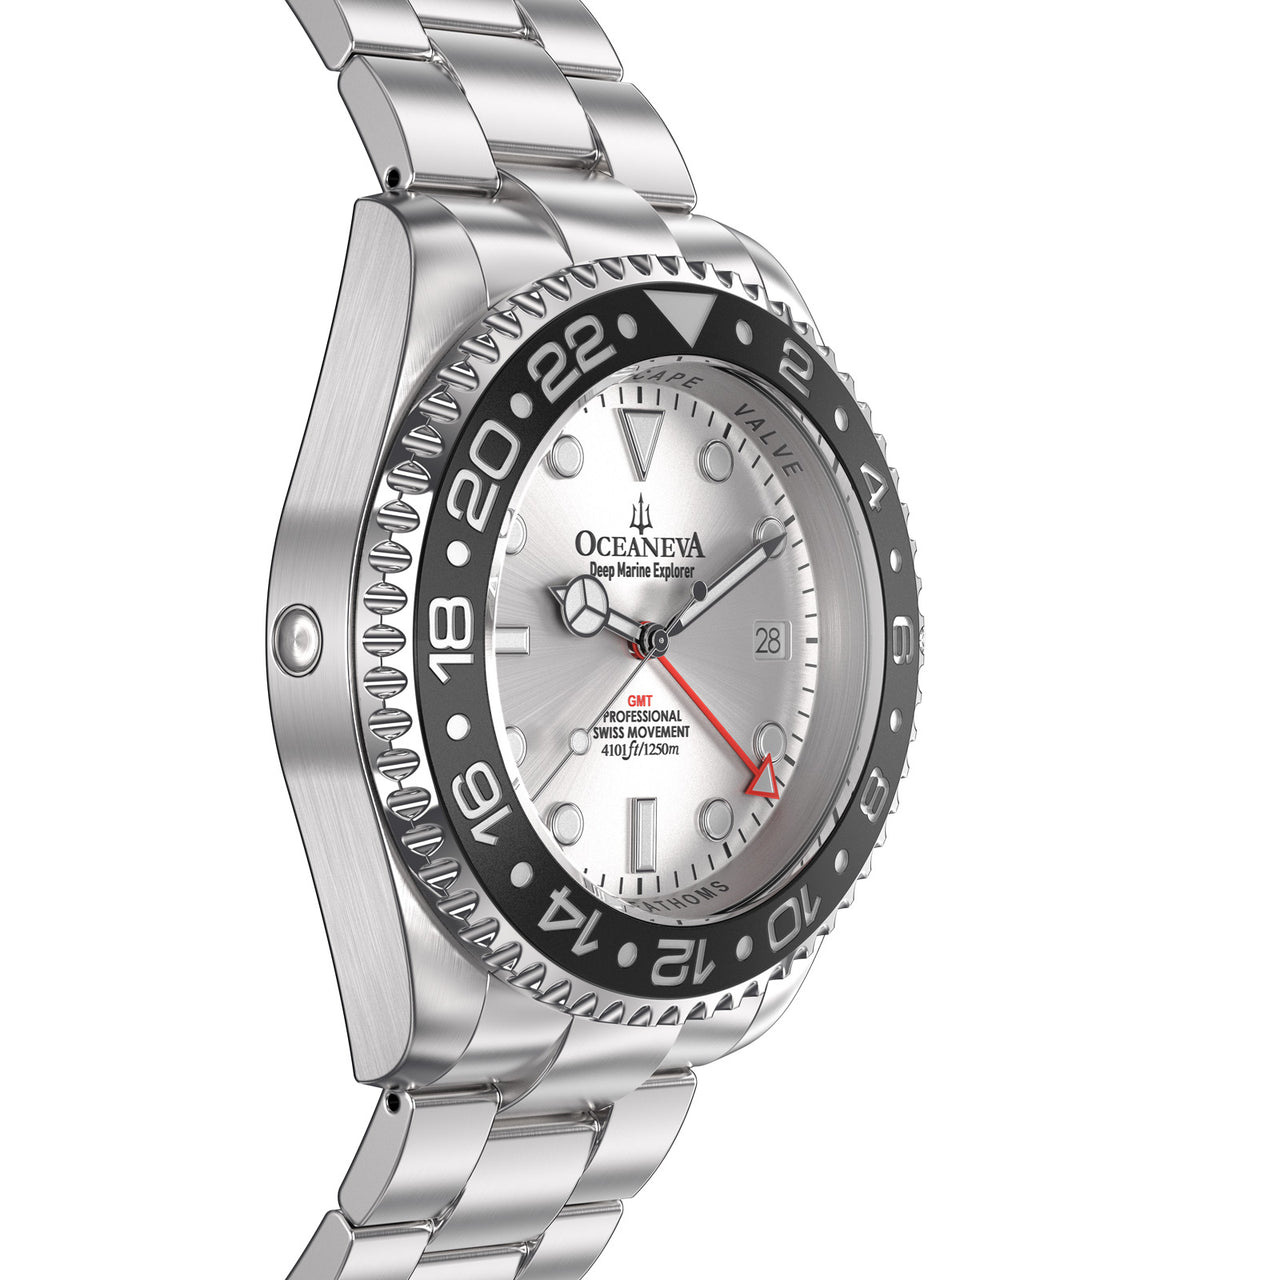 Oceaneva 1250M GMT Dive Watch Silver And Black Side Helium Escape Valve View